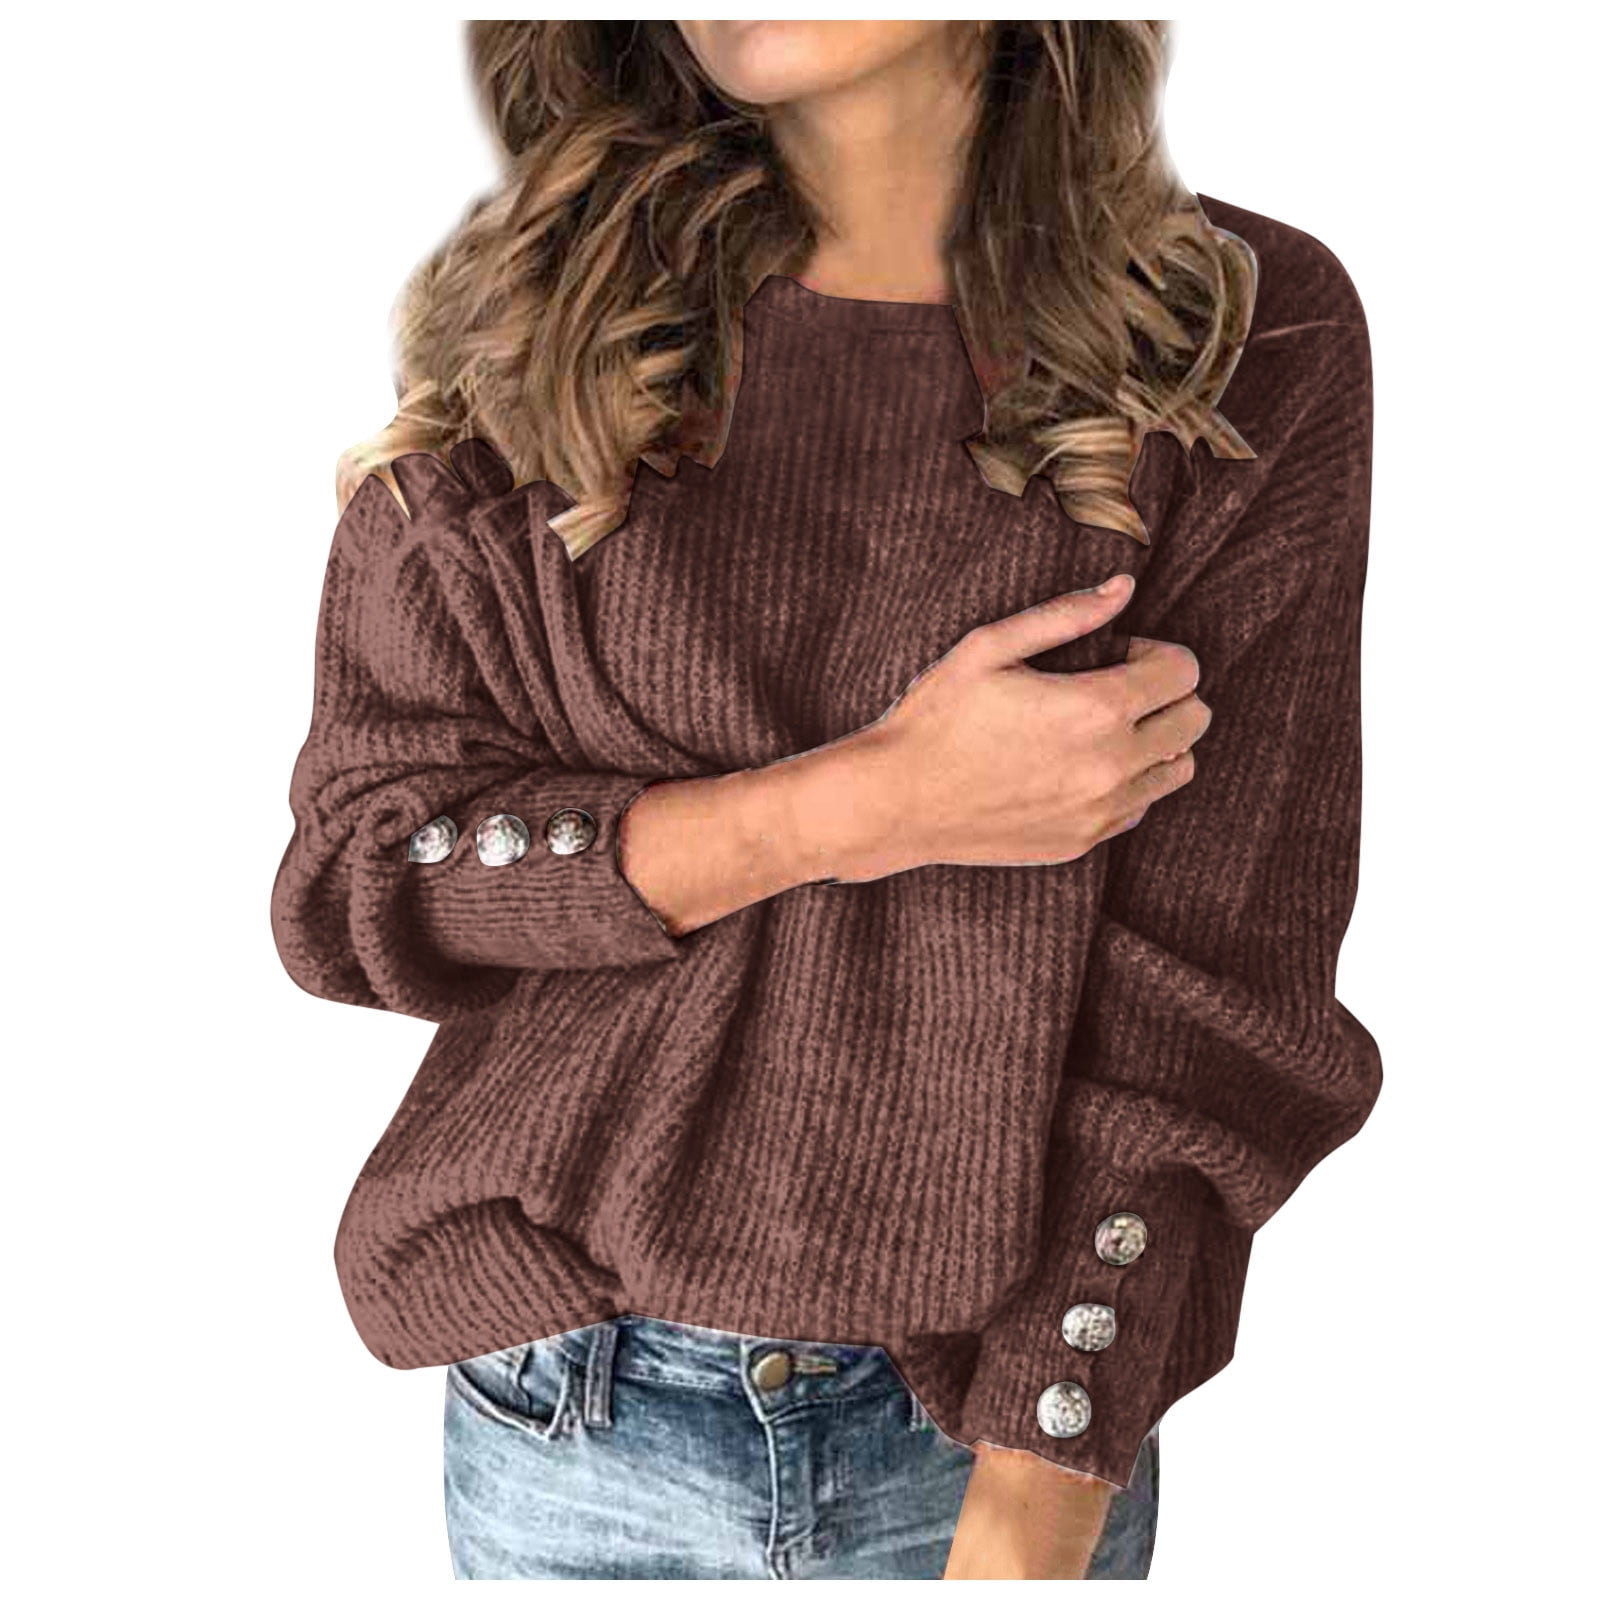 Lroplie Pullover Sweaters for Women Oversoze Round Neckline Long Sleeve ...